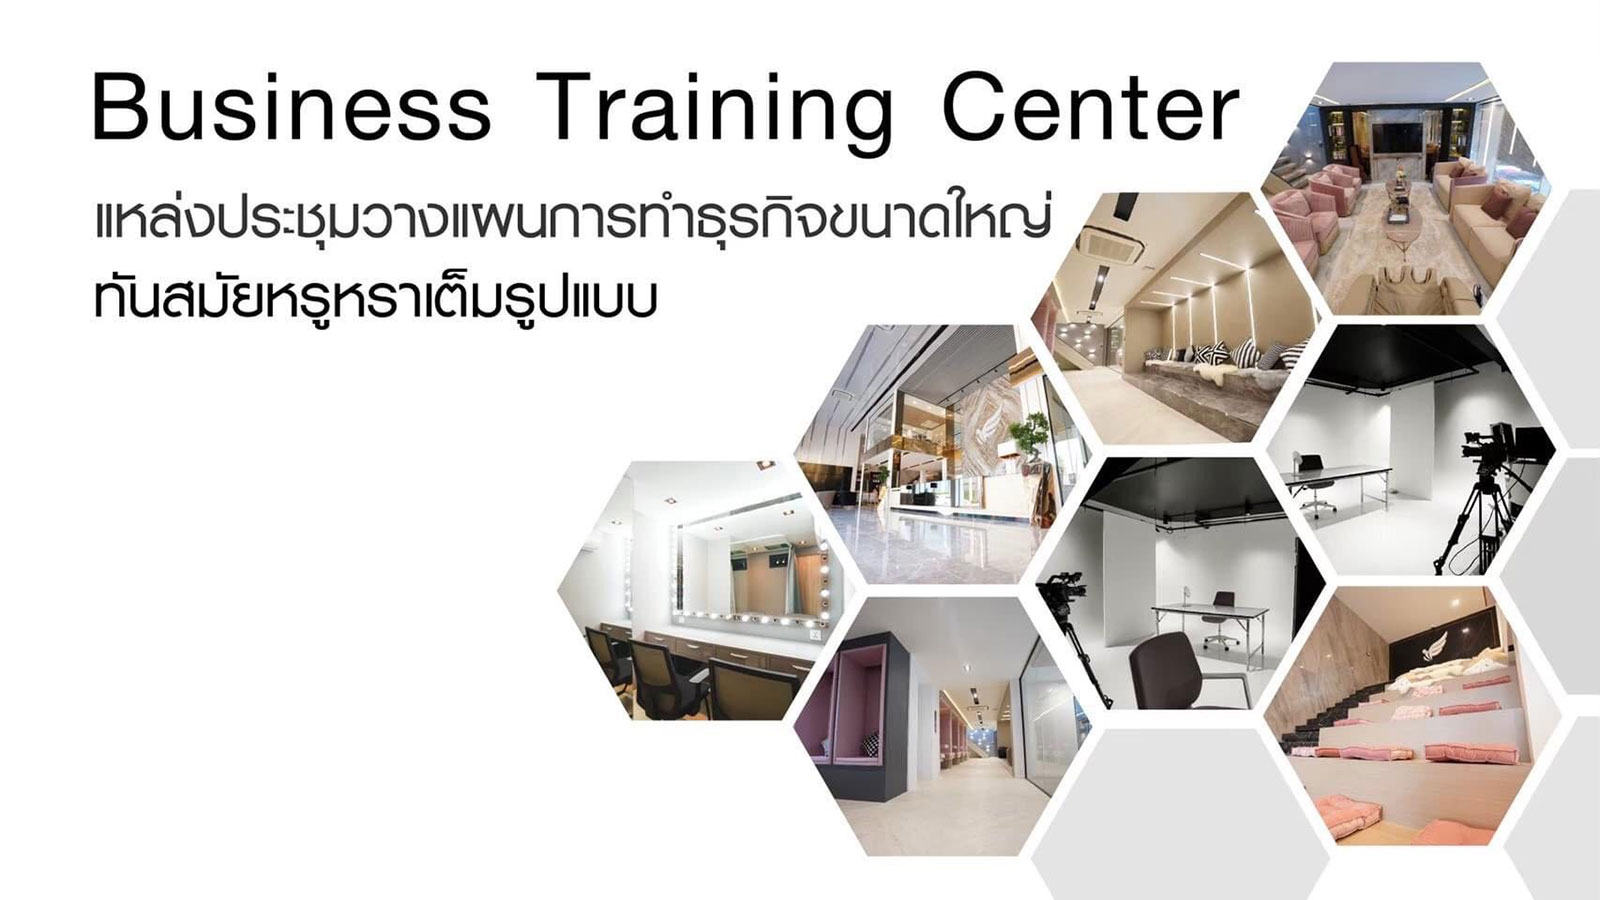 The iCon House - Business Training Center